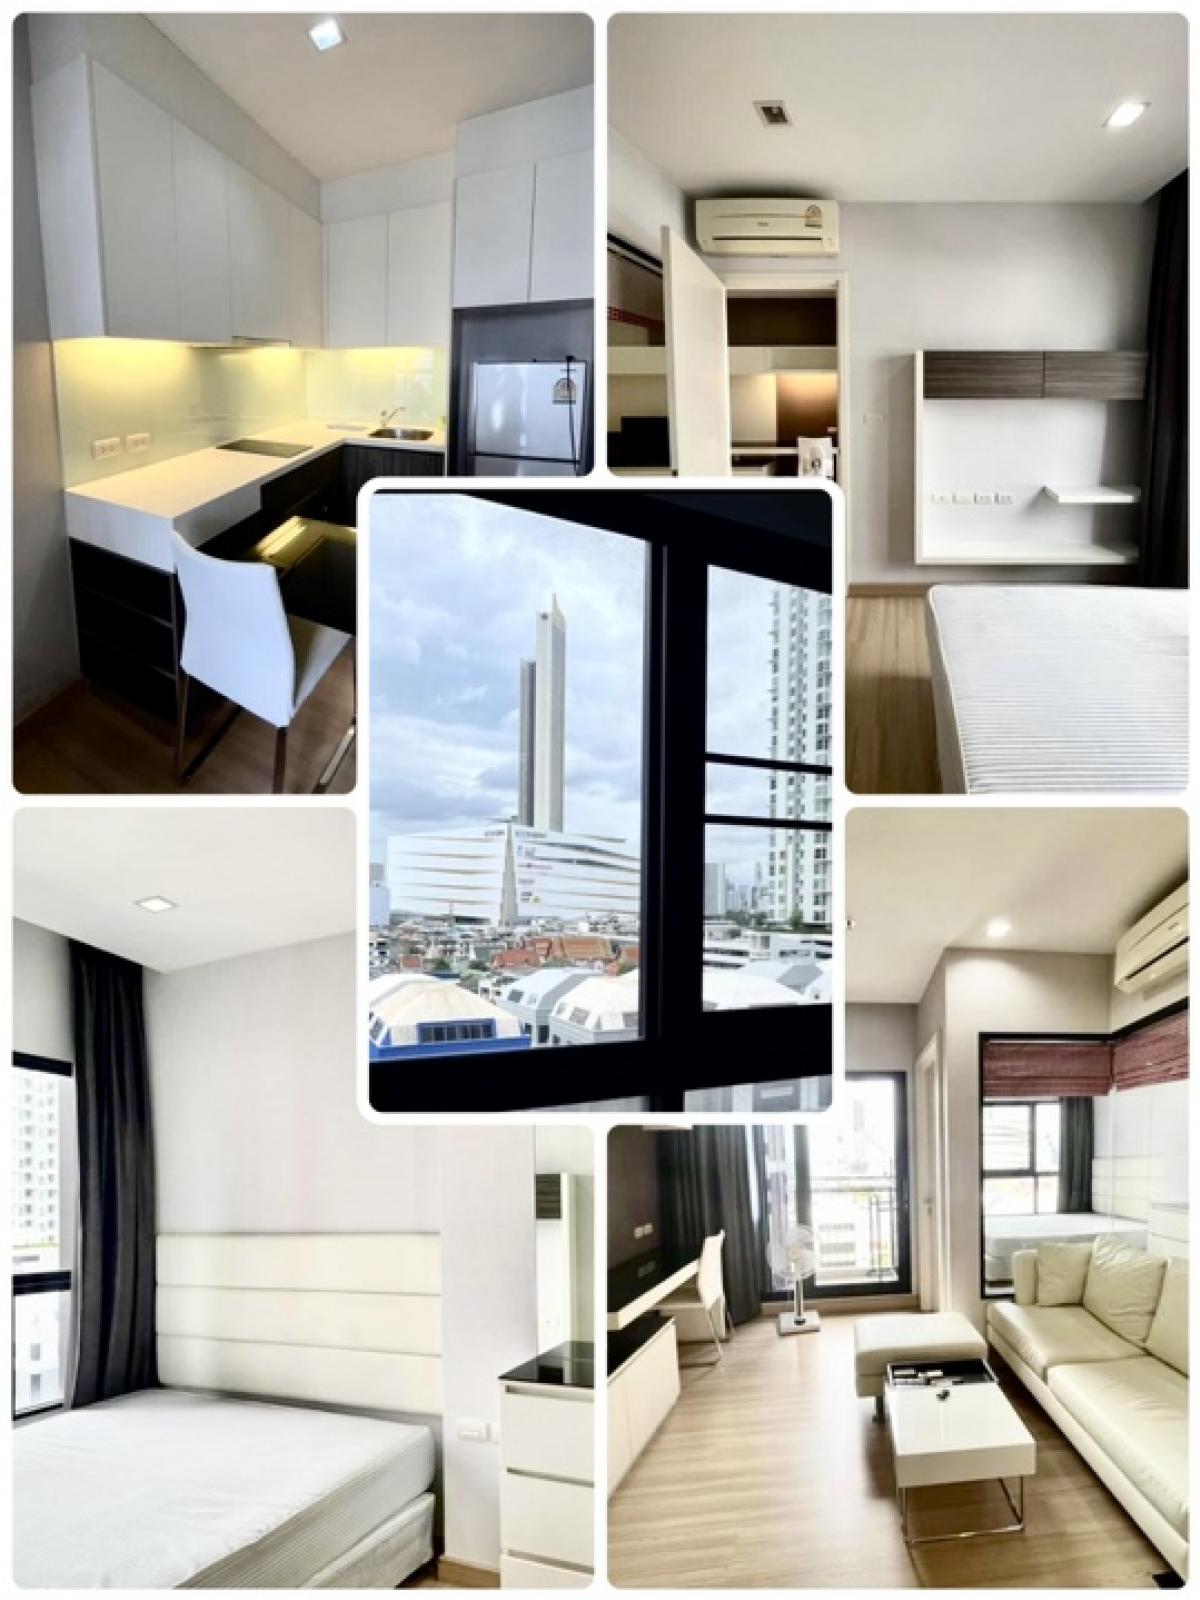 For RentCondoWongwianyai, Charoennakor : READY MOVE-IN🔥Strong promotion Move in for 5 months 🔥🎇Beautiful view•ICON Siam🎇See beautiful fireworks•all year long 🍀URBANO Absolute Sathorn-Taksin🍀1-bed 39 sq m.❇️ 11th floor